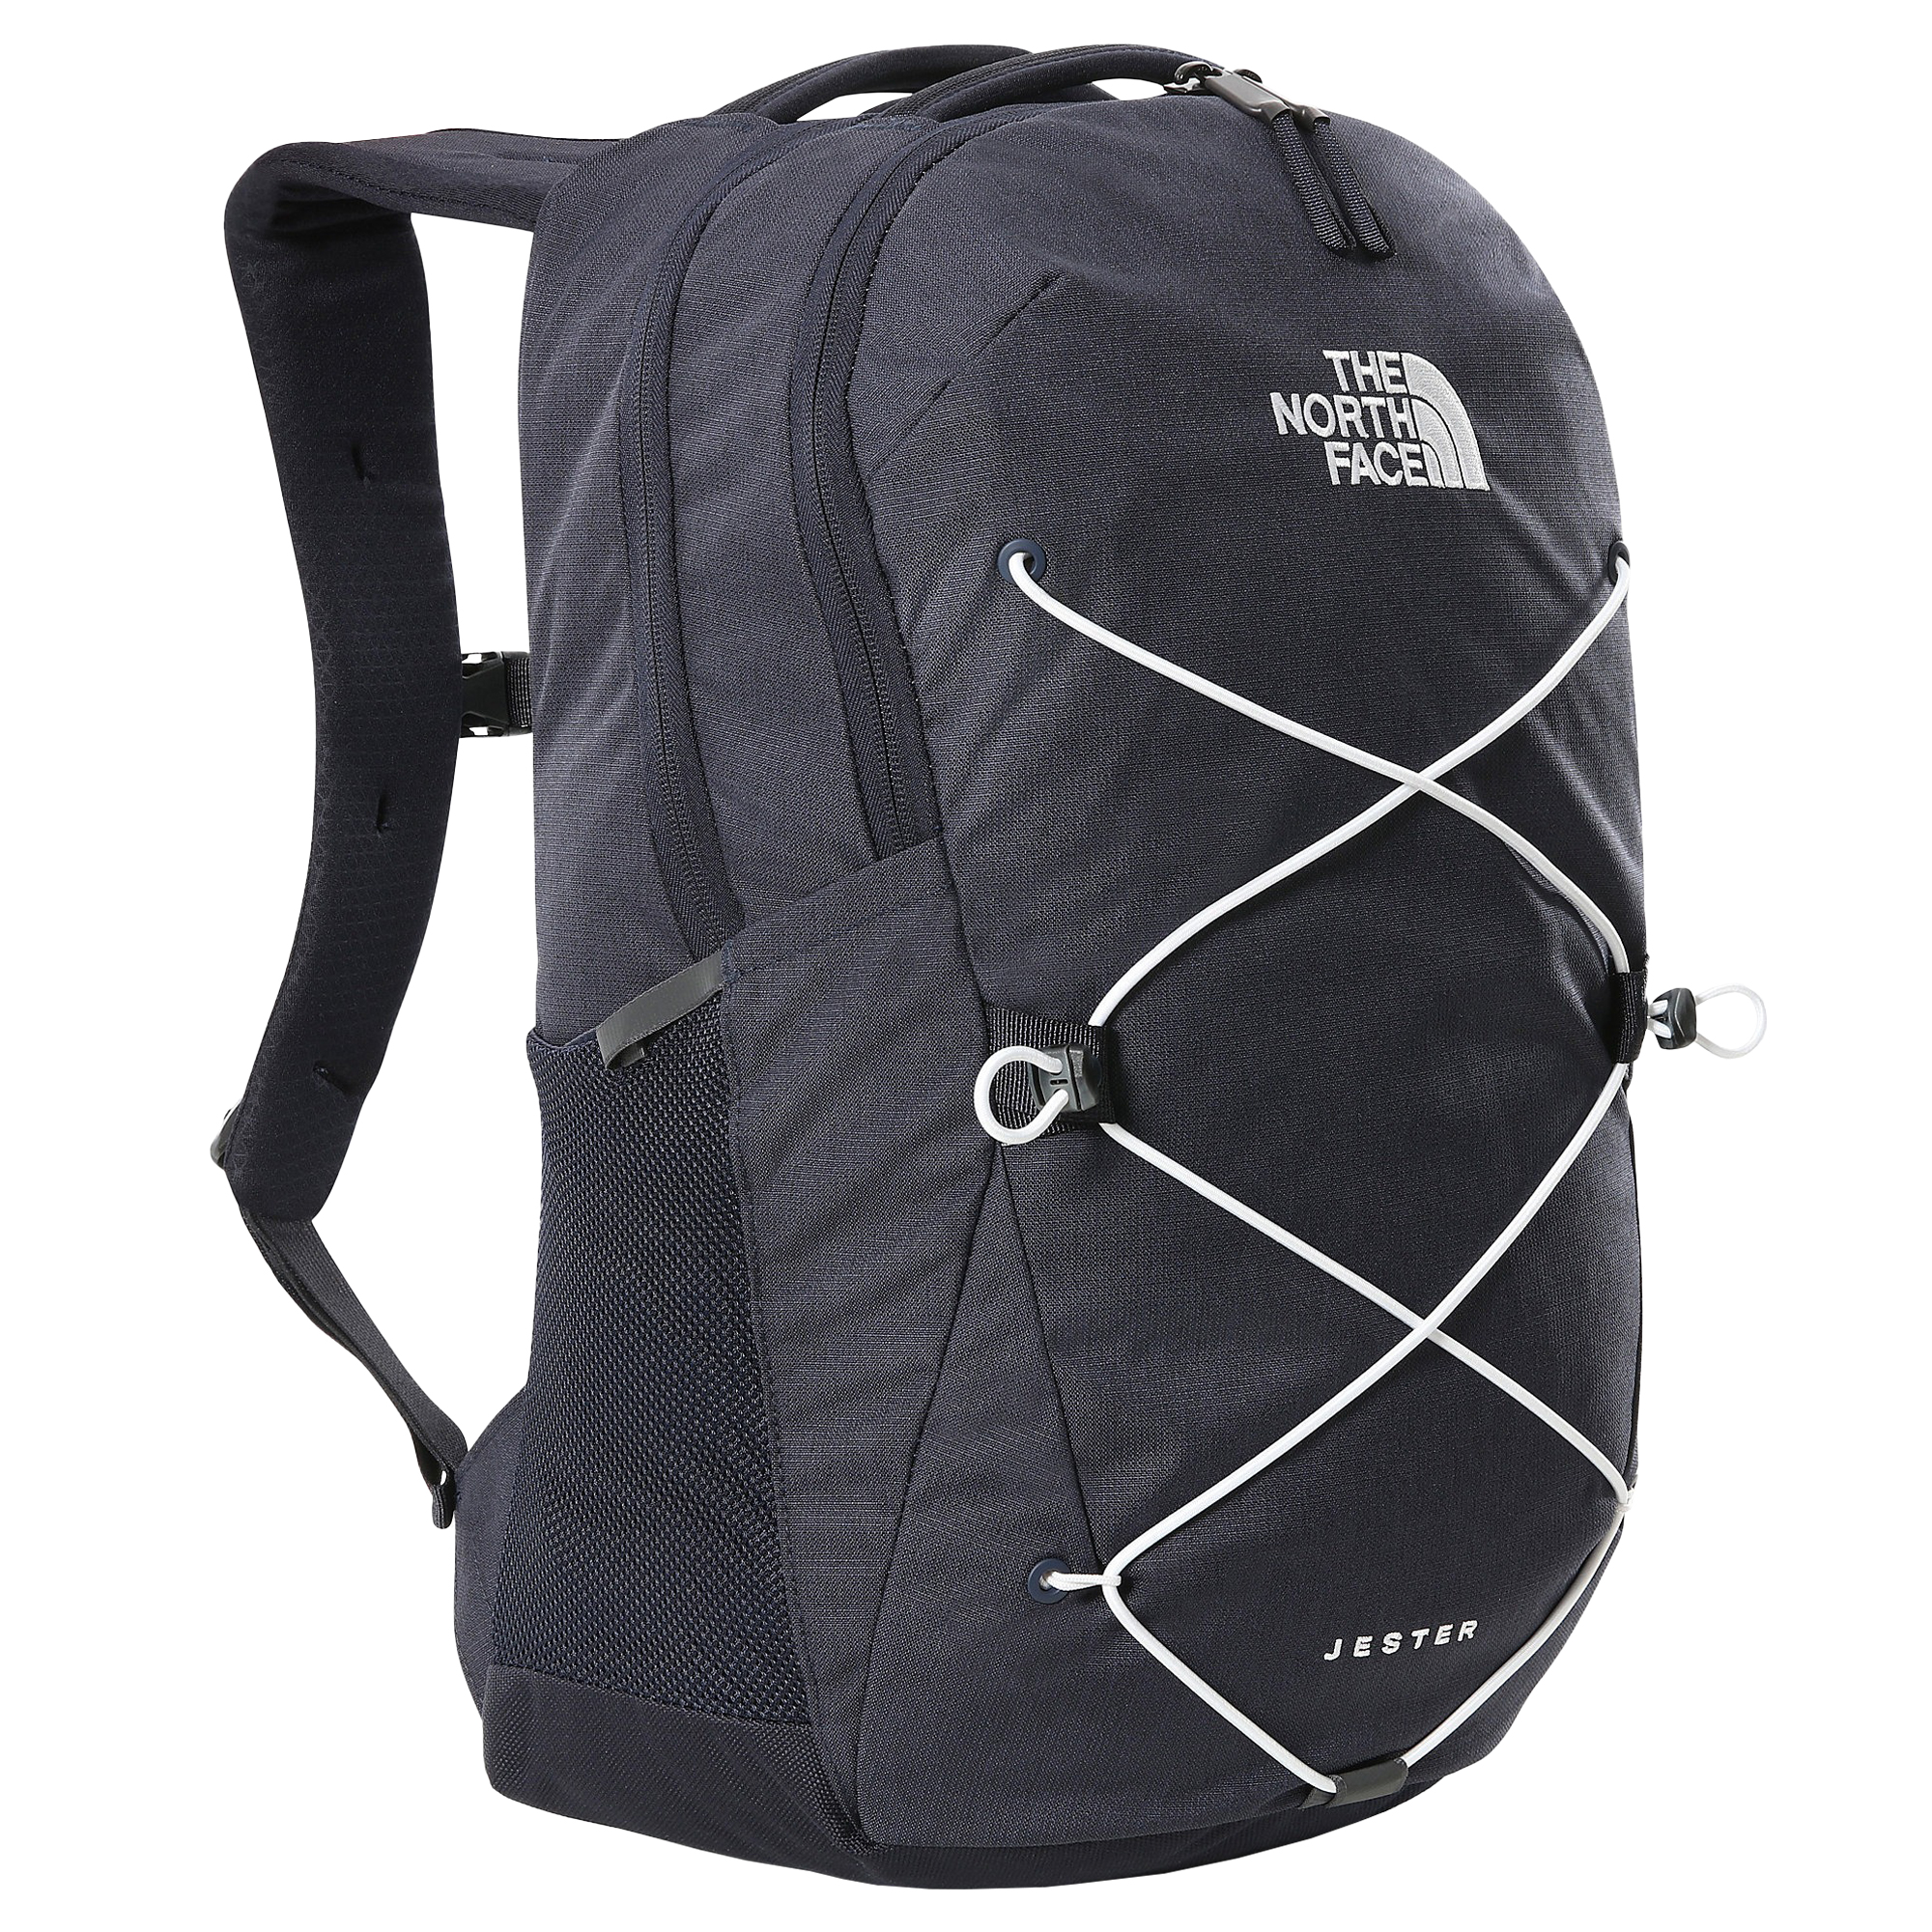 Sac à dos The North Face Jester (27,5L)